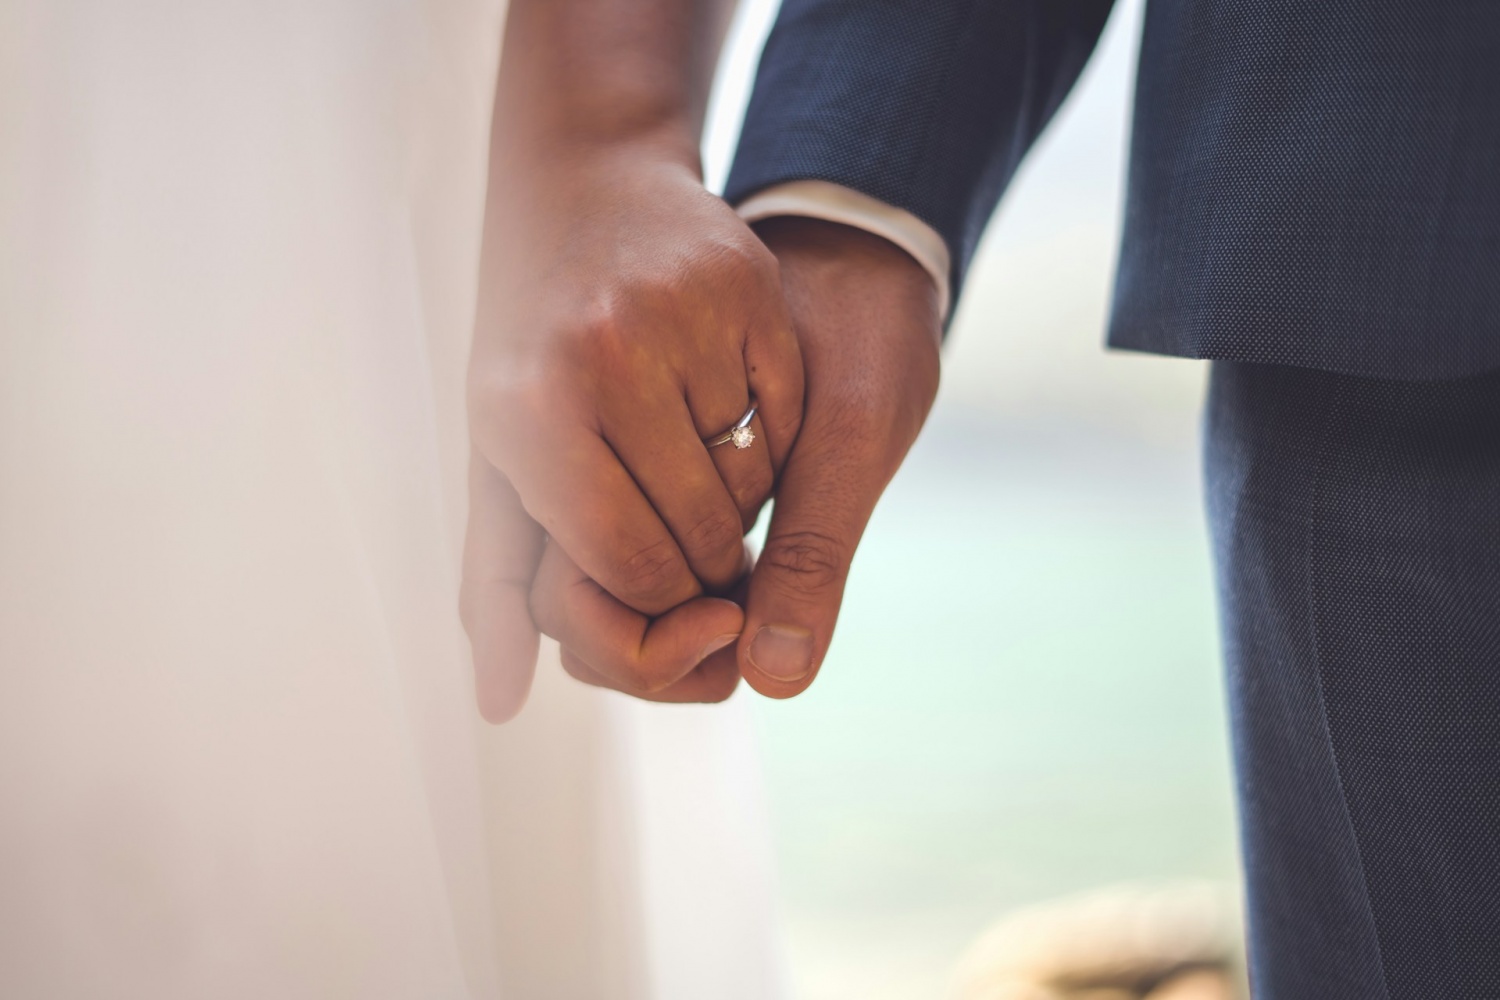 From "I Do" to "We Do Budget": Financial Checklist for a Strong Marriage